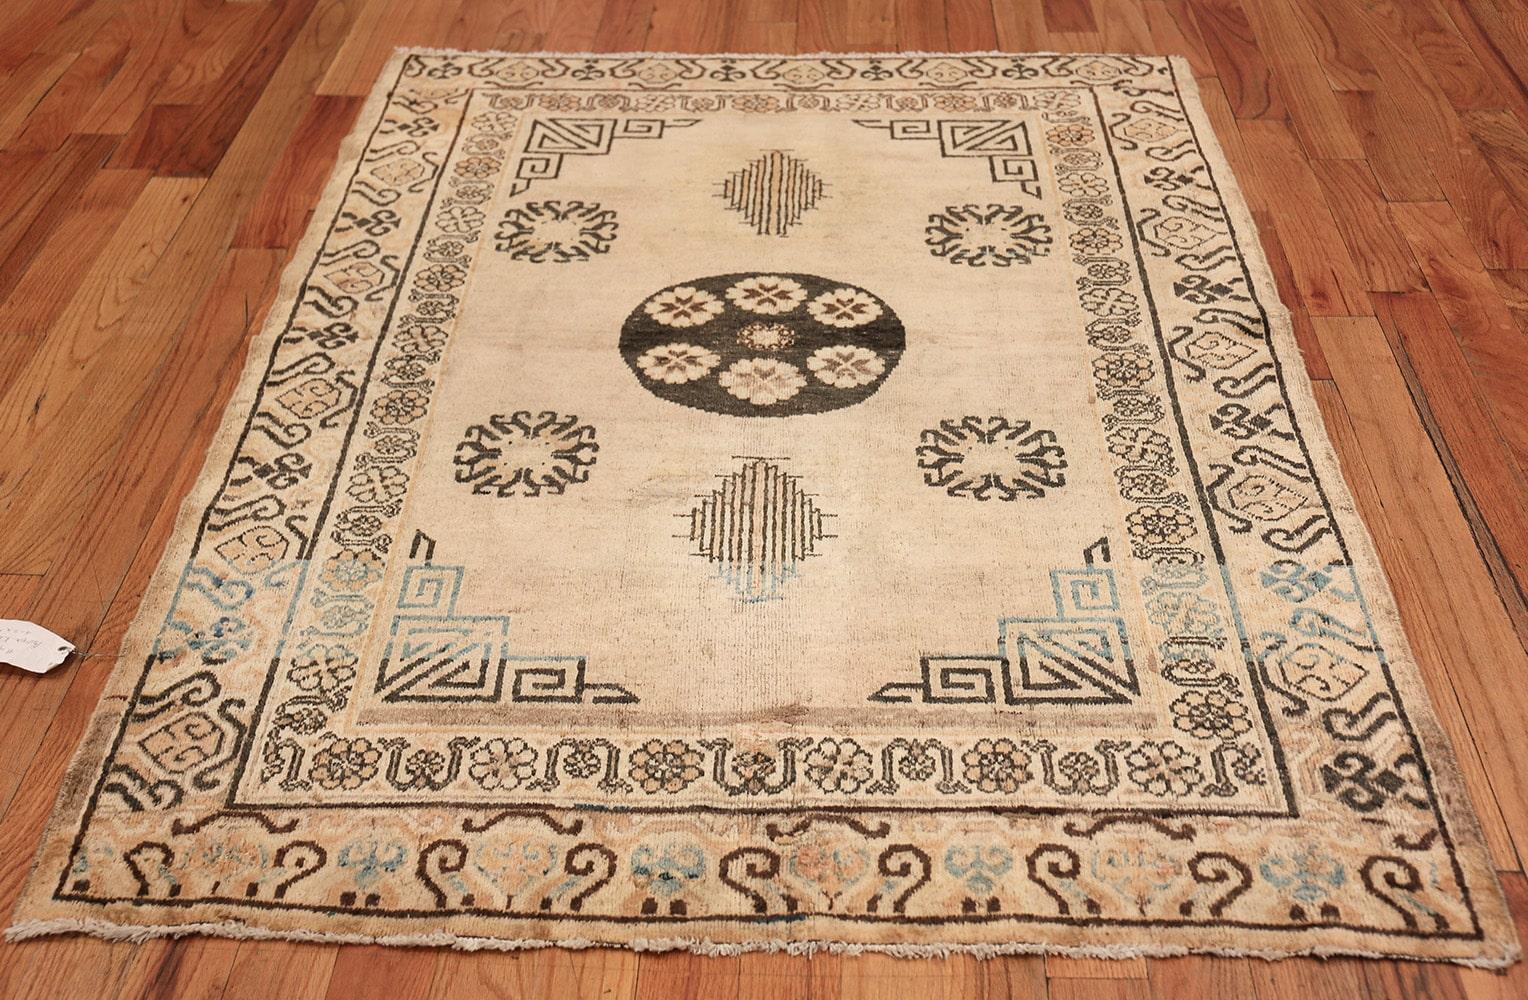 Antique East Turkestan Khotan rug, Origin: East Turkestan, circa 1900. Size: 4 ft 2 in x 5 ft 8 in (1.27 m x 1.73 m)

Representing an elegant marriage of East and West, this distinguished antique Khotan rug has a traditional medallion composition